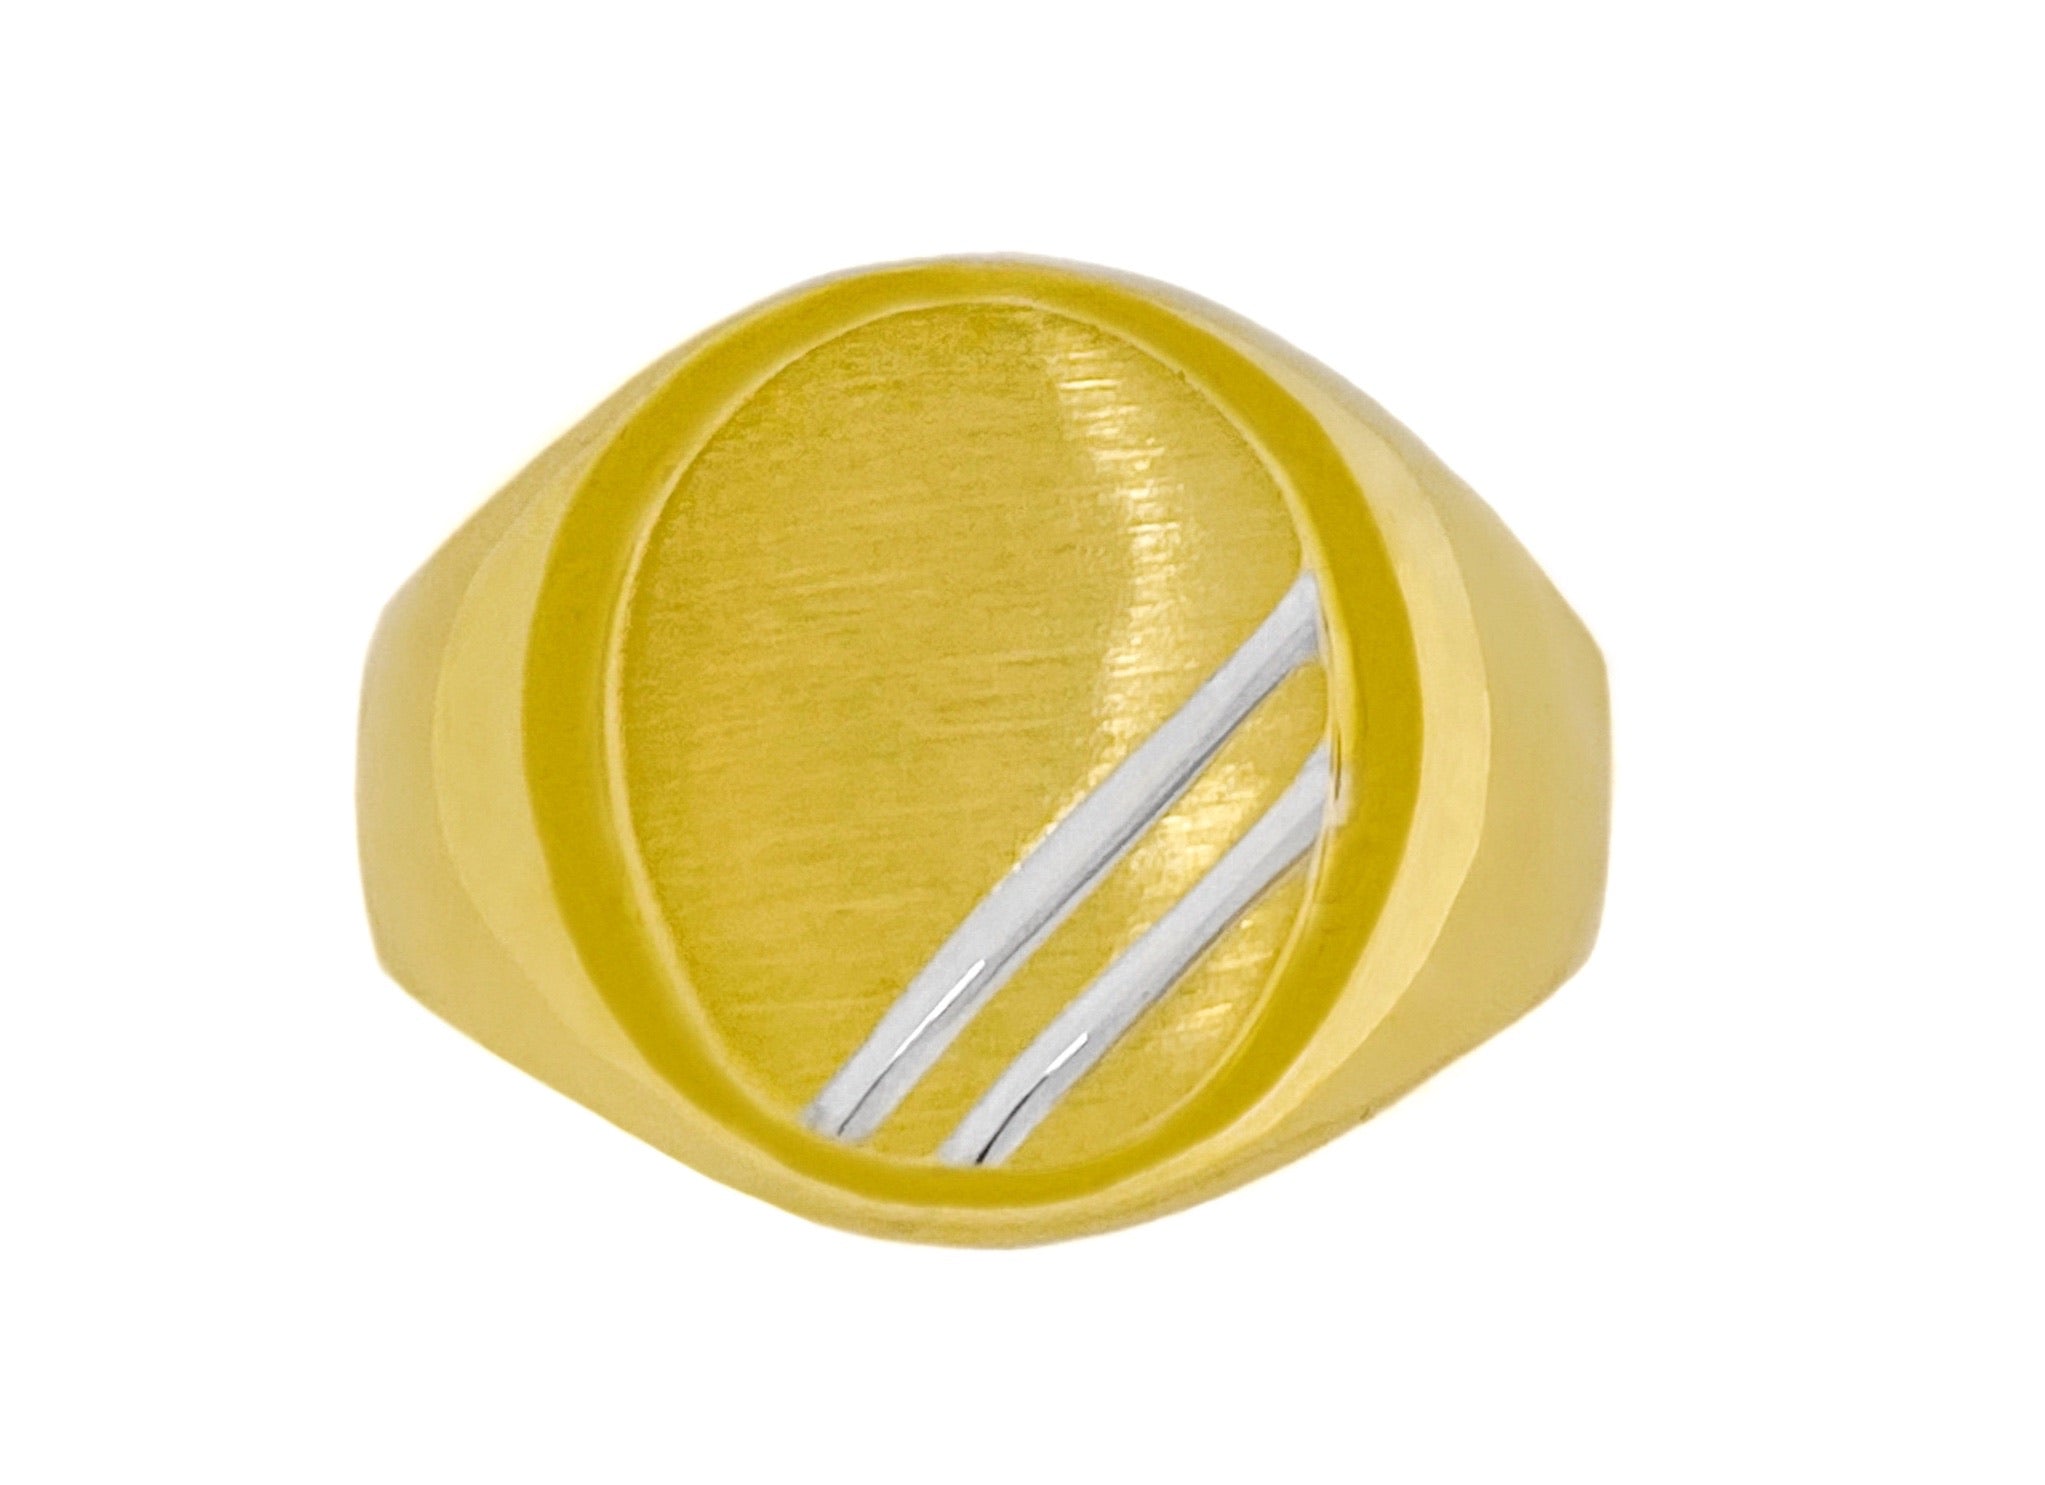 14K YELLOW GOLD OVAL SIGNET RING